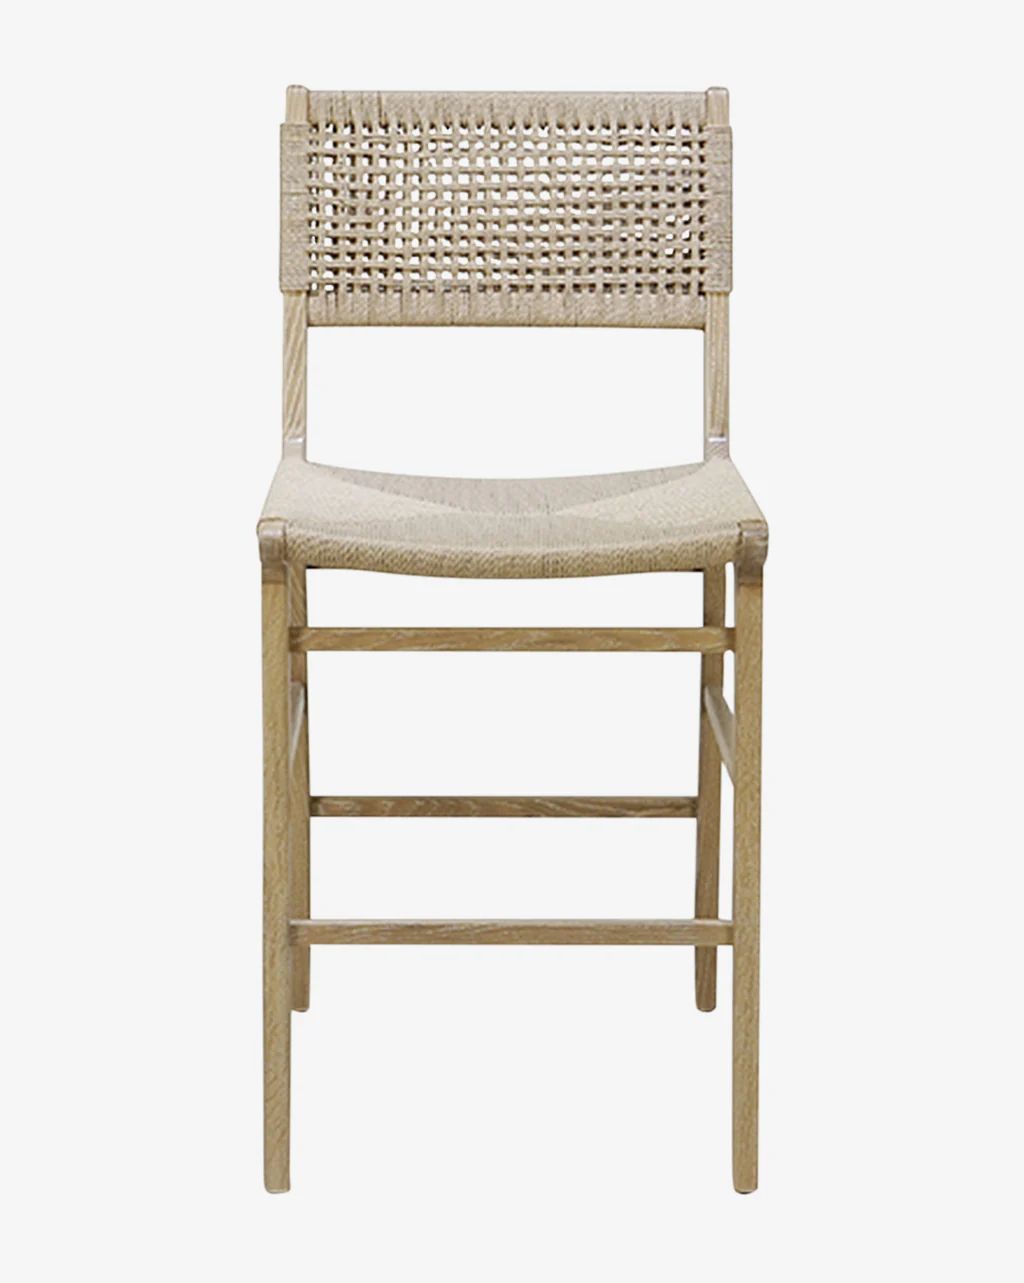 Anise Stool | McGee & Co.